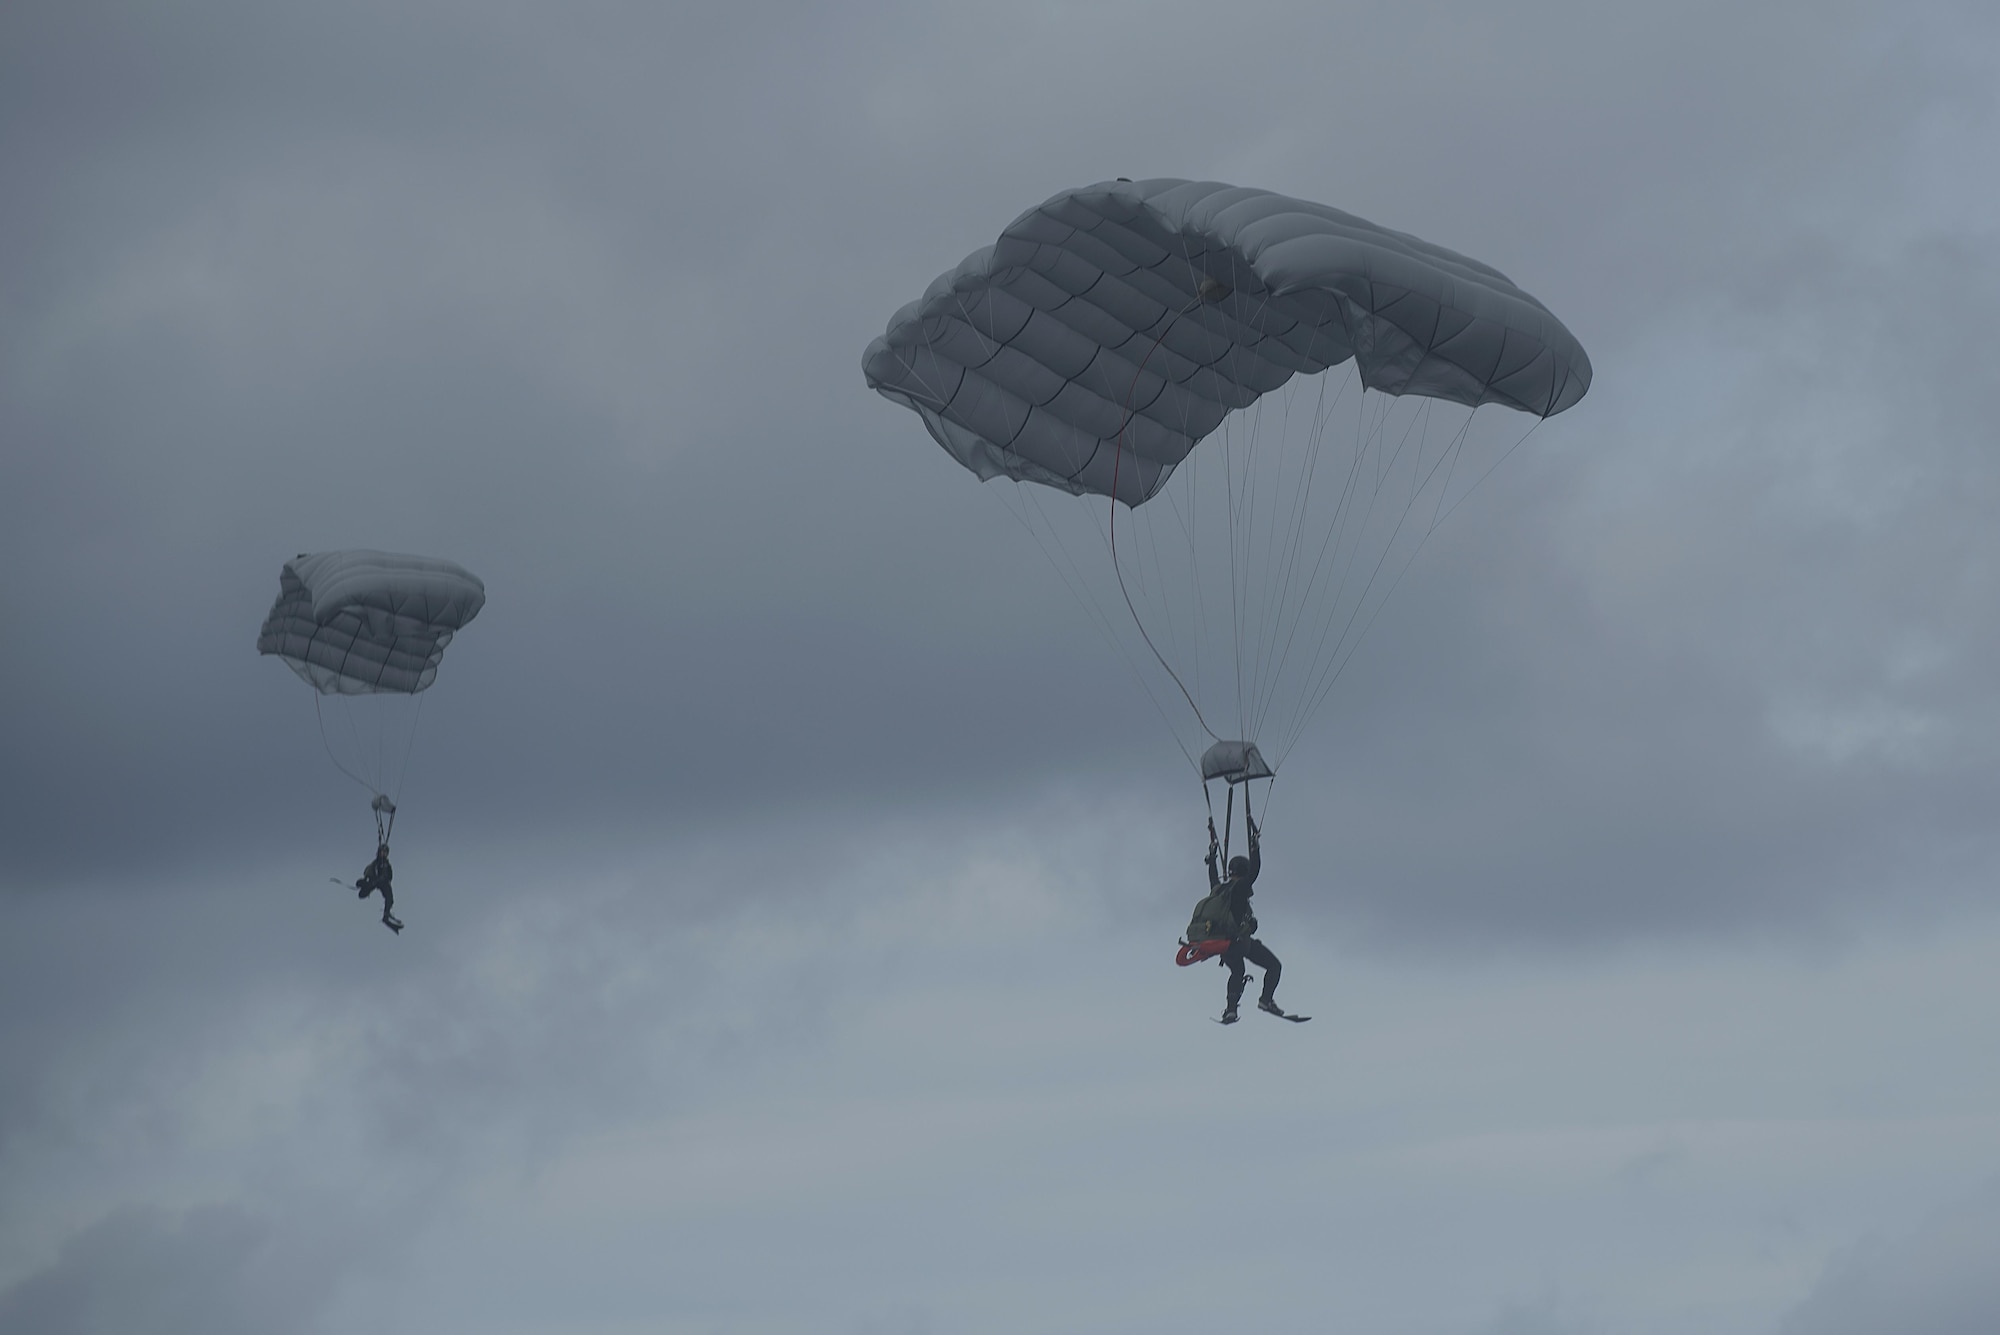 Japan Air Self-Defense Force pararescuemen parachute into the ocean during Exercise Keen Sword 17 Nov. 10, 2016, at Kadena Air Base, Japan. JASDF and 31st Rescue Squadron Pararescuemen conducted a mass casualty exercise, practicing rescuing survivors of an aircraft crash in open ocean. (U.S. Air Force photo by Airman 1st Class Corey M. Pettis)